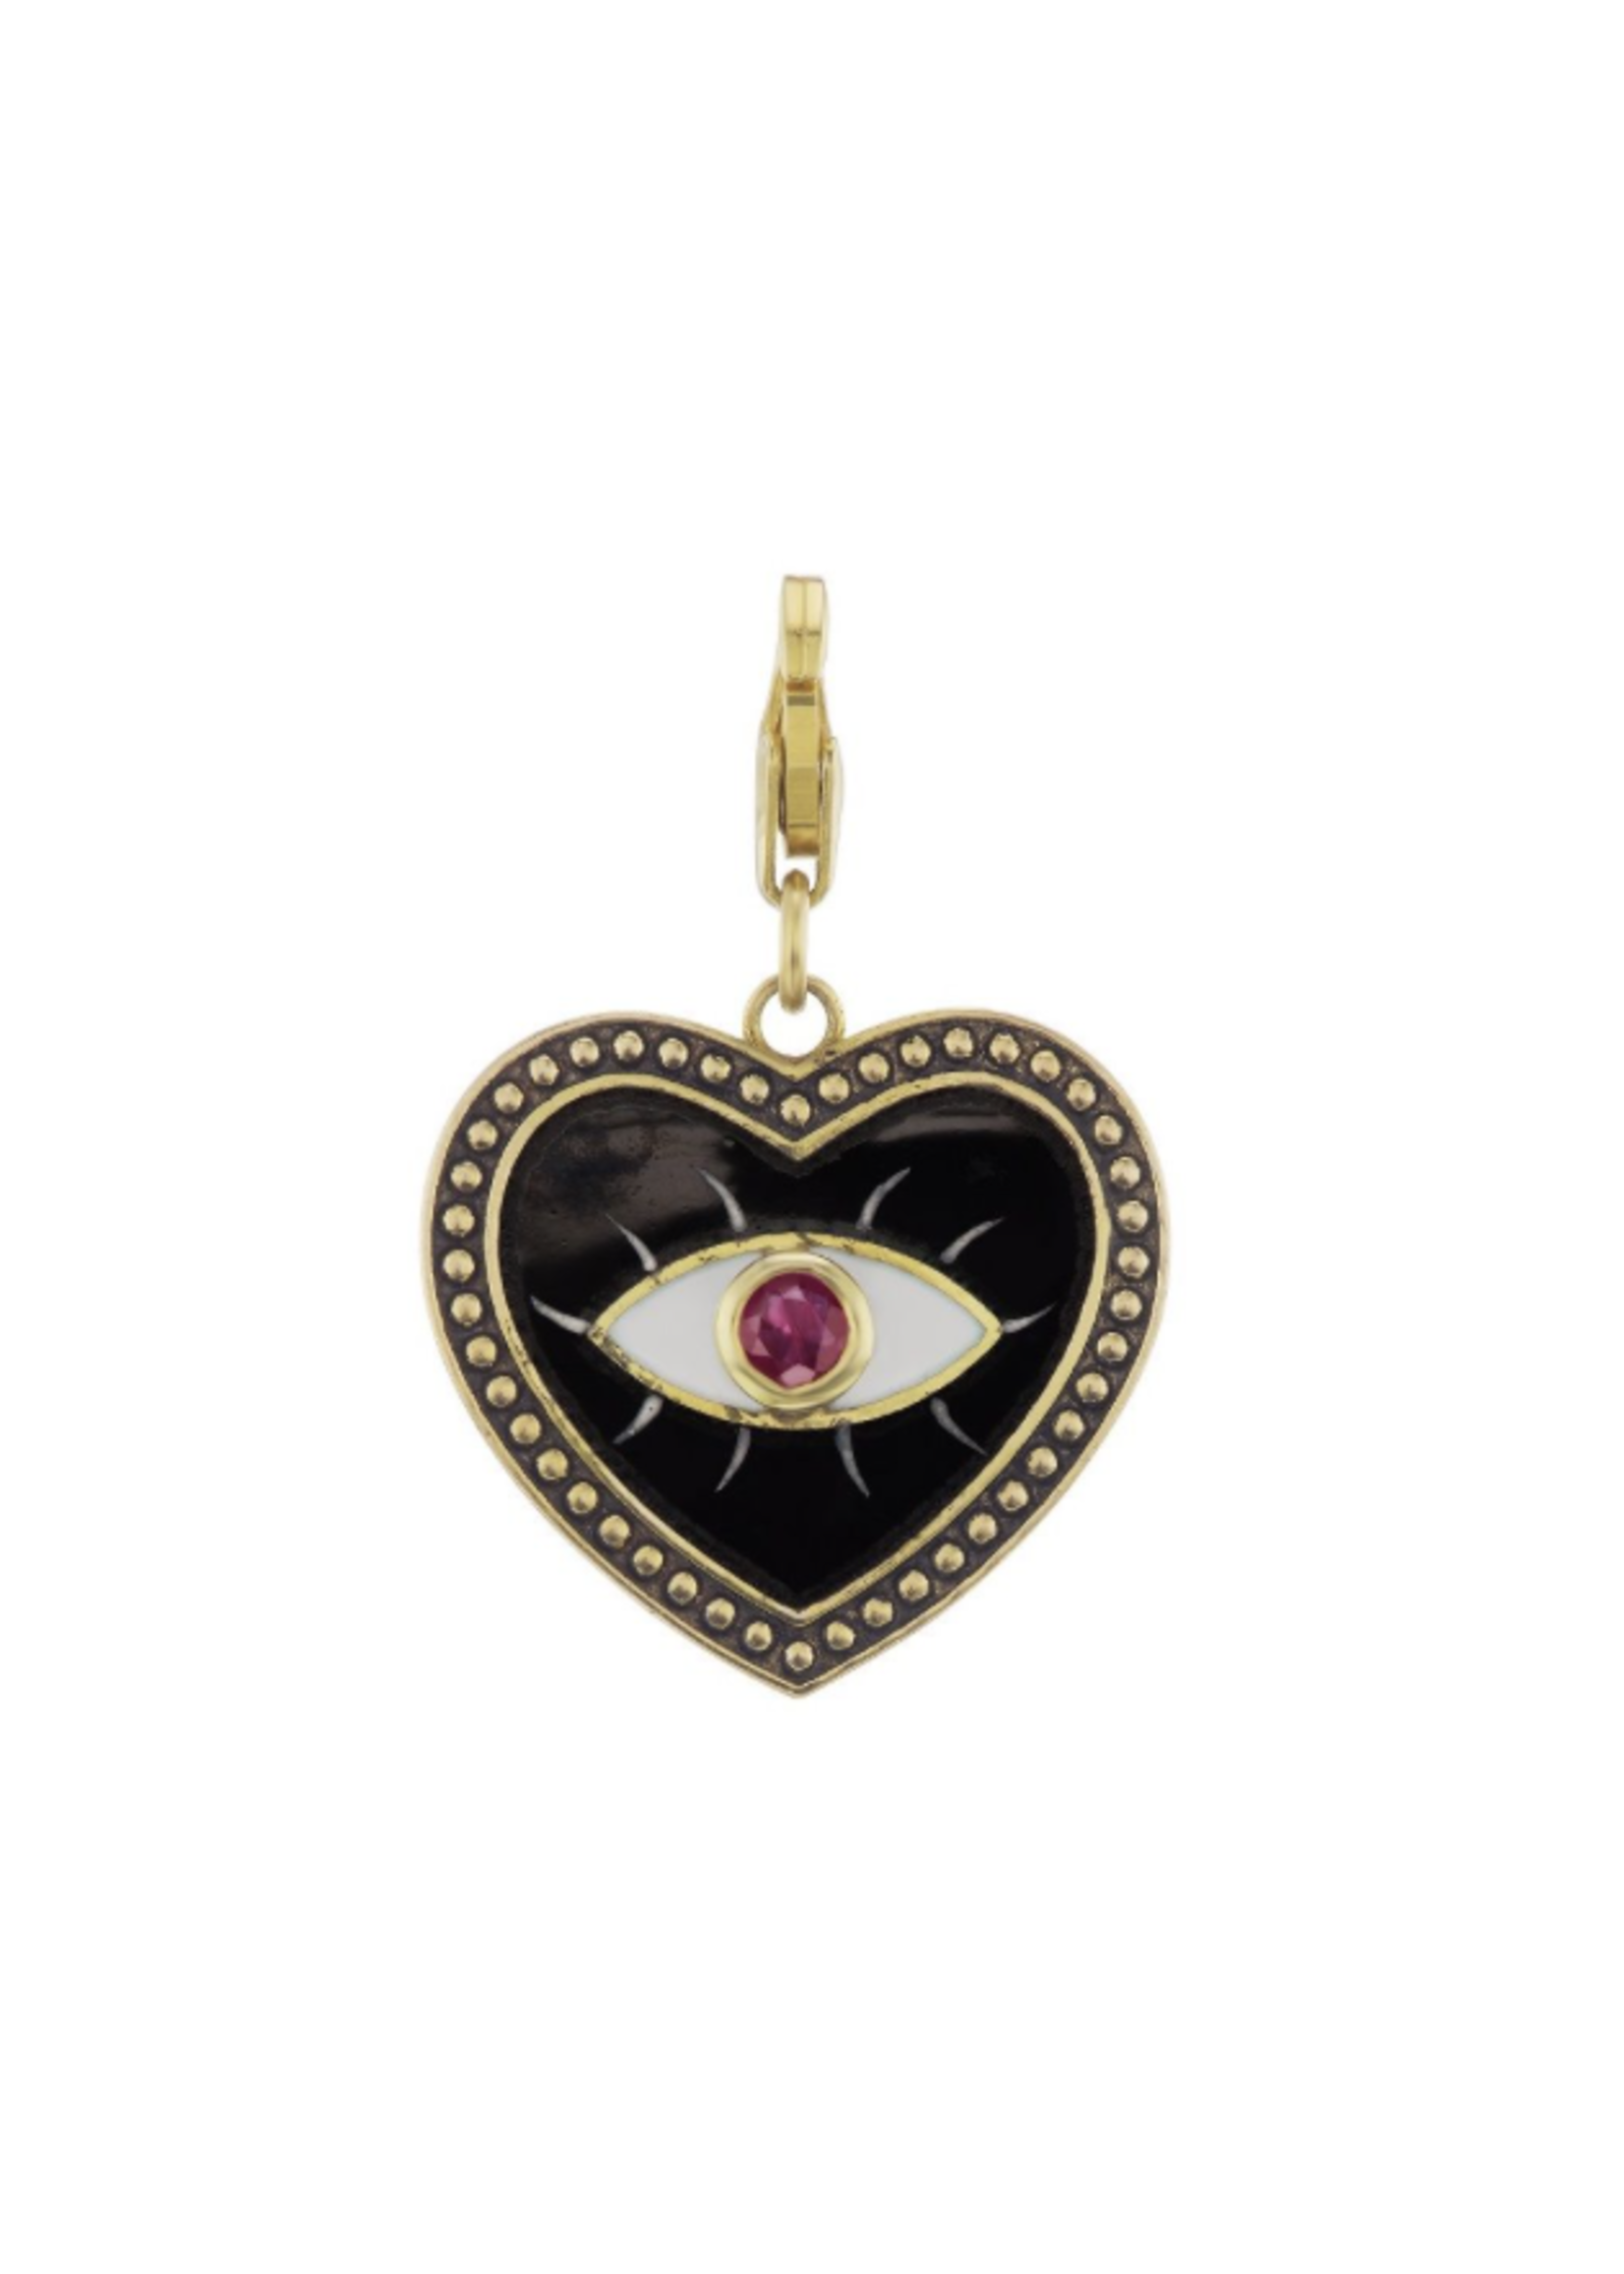 Have a Heart Enamel Evil Eye Heart Charm with Ruby